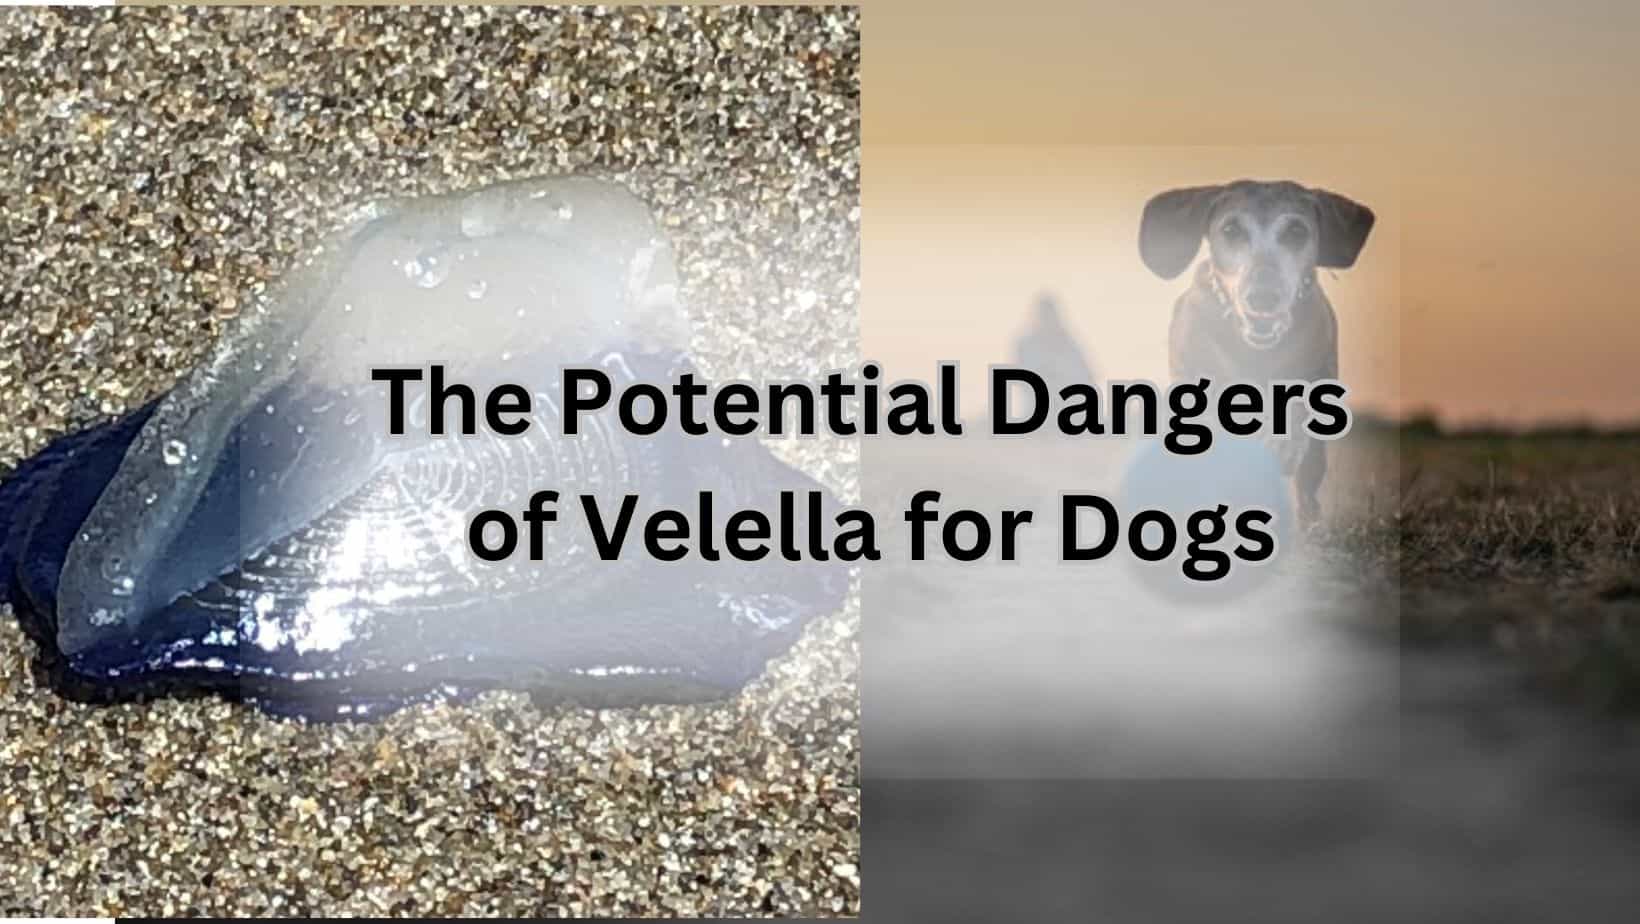 The Potential Dangers of Velella for Dogs